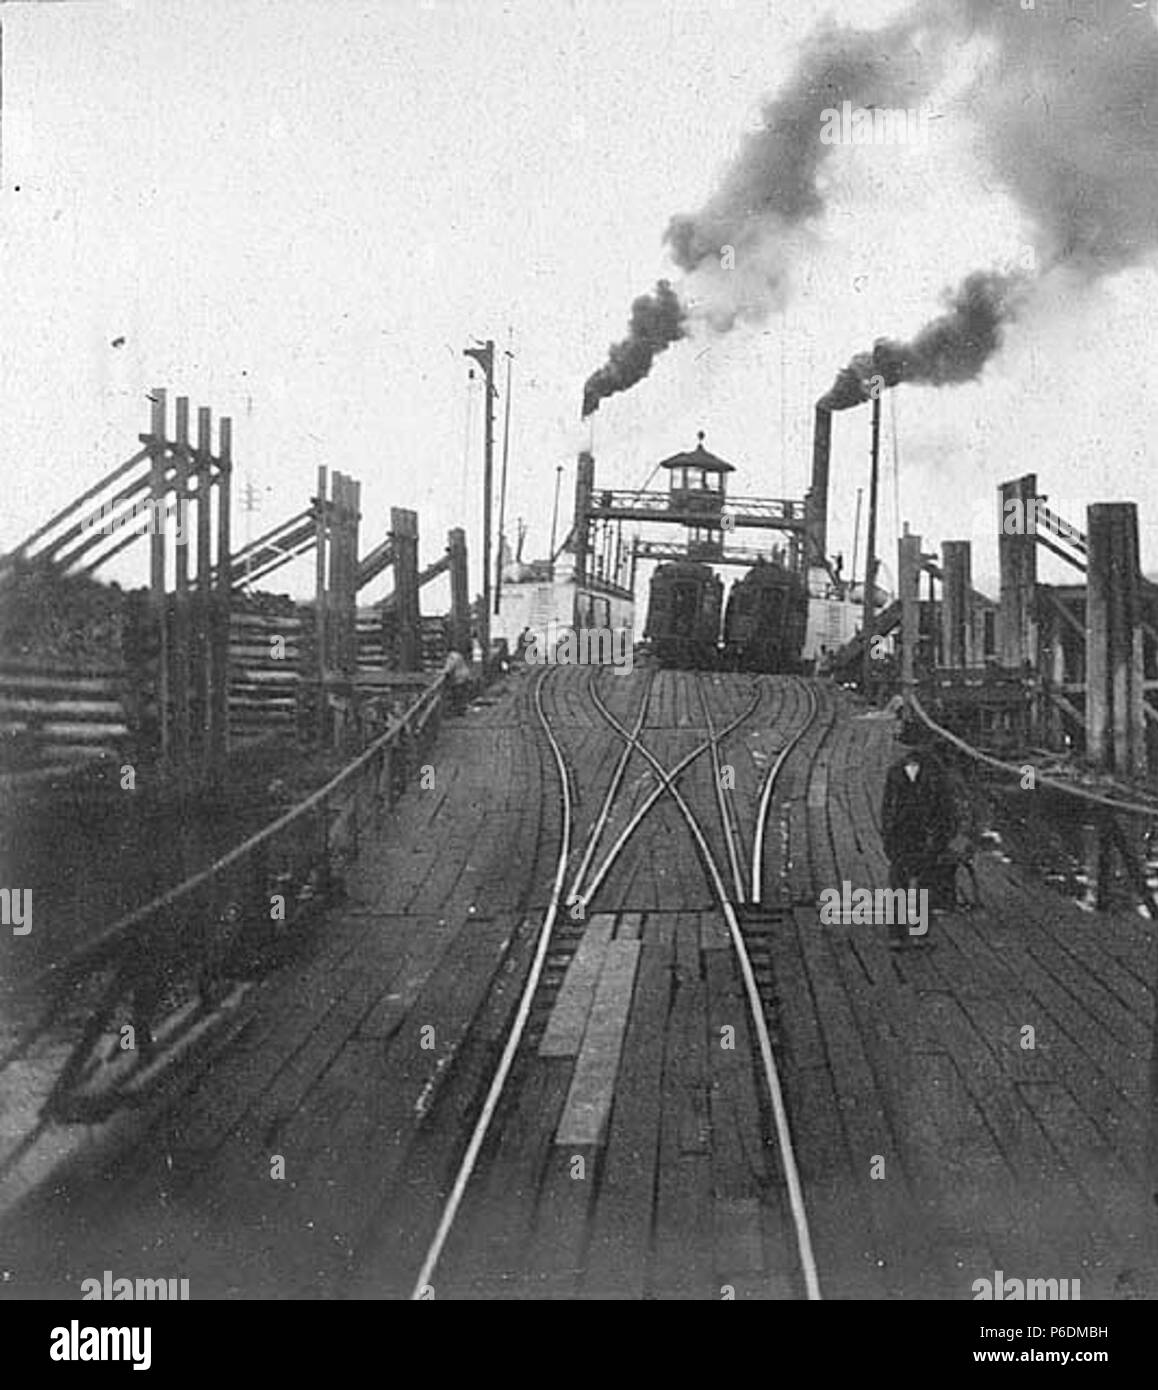 . English: Northern Pacific Railroad loading area for the ferry TACOMA, November 8, 1900 . English: The ferry Tacoma transported trains across the Columbia River from Goble, Oregon to Kalama, Washington from 1884 until 1908 . Text from Kiehl log: Ferry 'Tacoma' N.P.R.R., Nov. 8, 1900 Album 2.303 Subjects (LCSH): Tacoma (Ferry); Railroad tracks--United States; Boat trains--United States  . 1900 64 Northern Pacific Railroad loading area for the ferry TACOMA, November 8, 1900 (KIEHL 267) Stock Photo